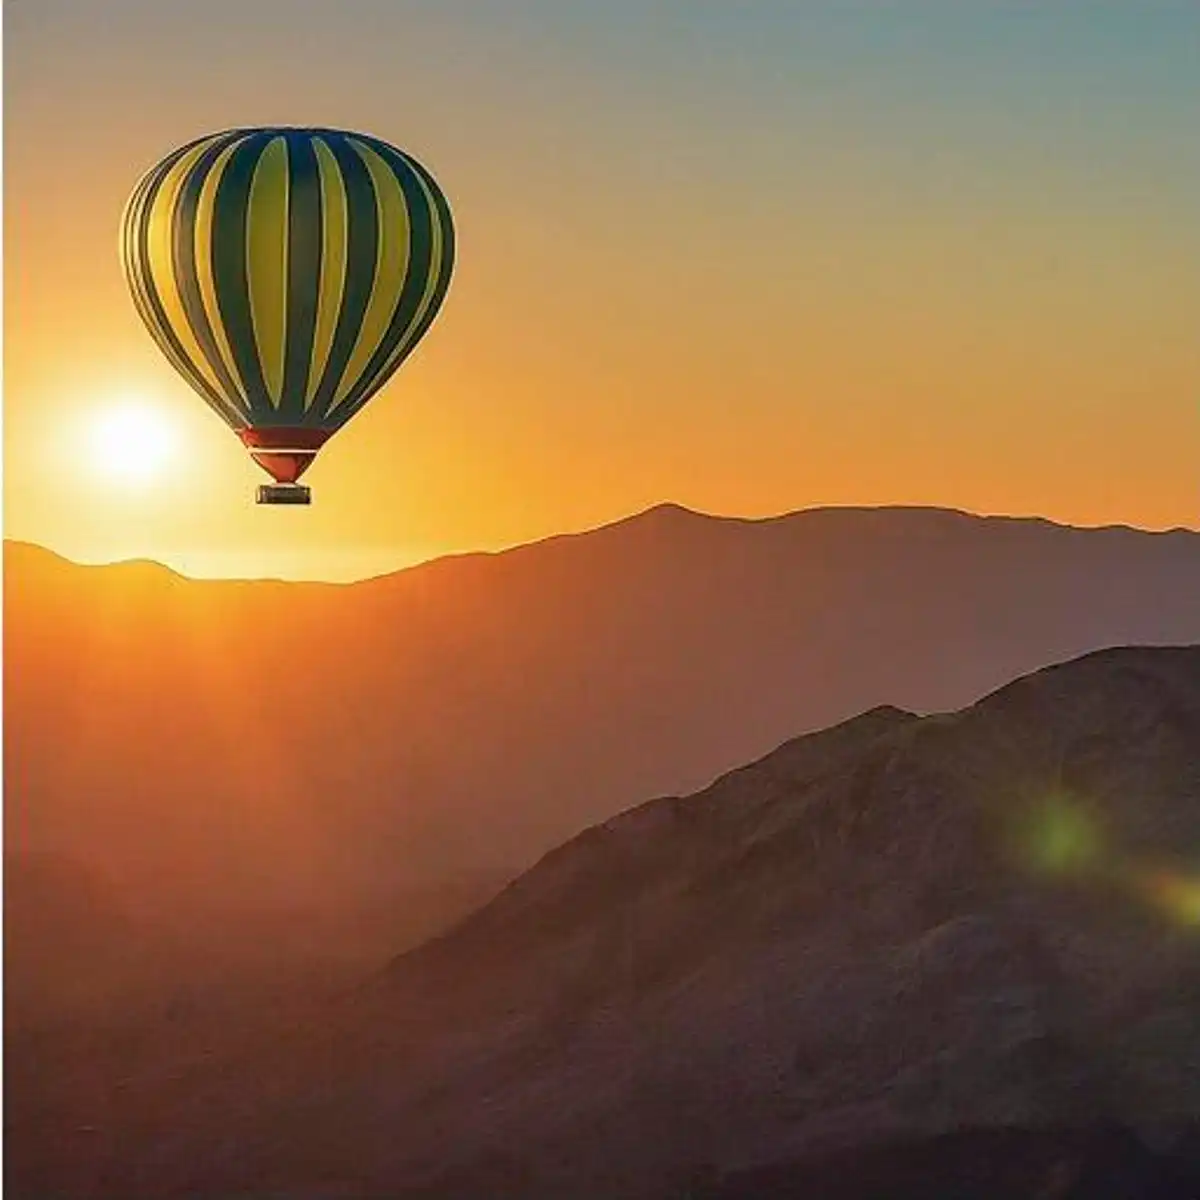 Bard-generated image of a hot air balloon flying over mountains at sunset